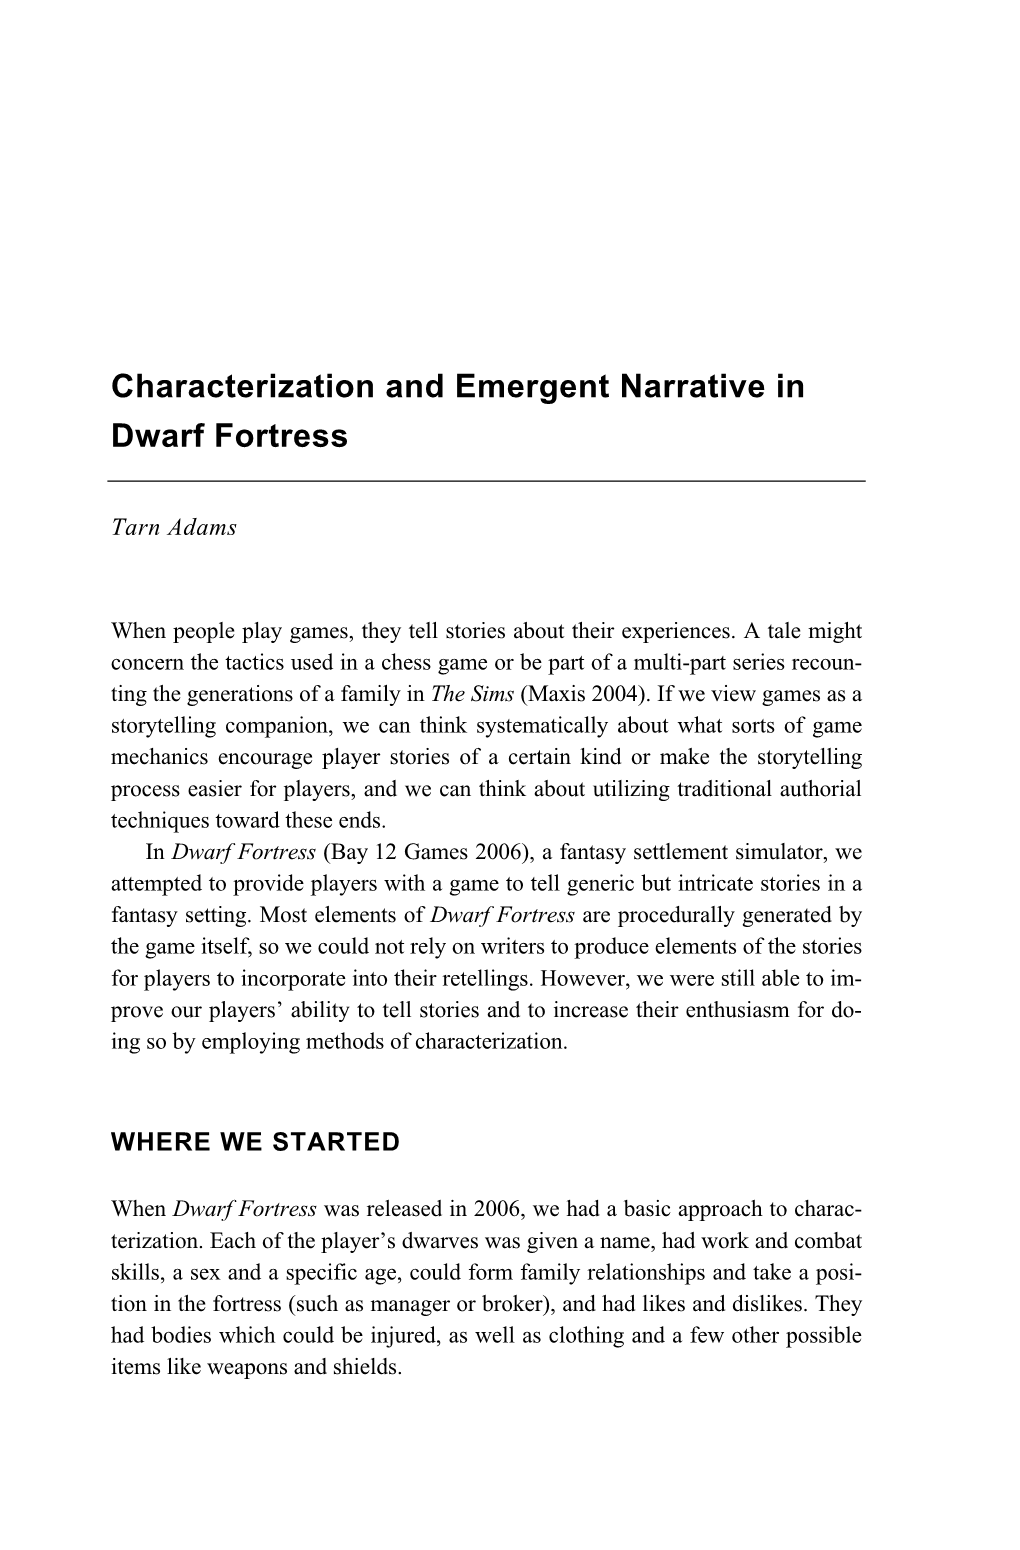 Characterization and Emergent Narrative in Dwarf Fortress